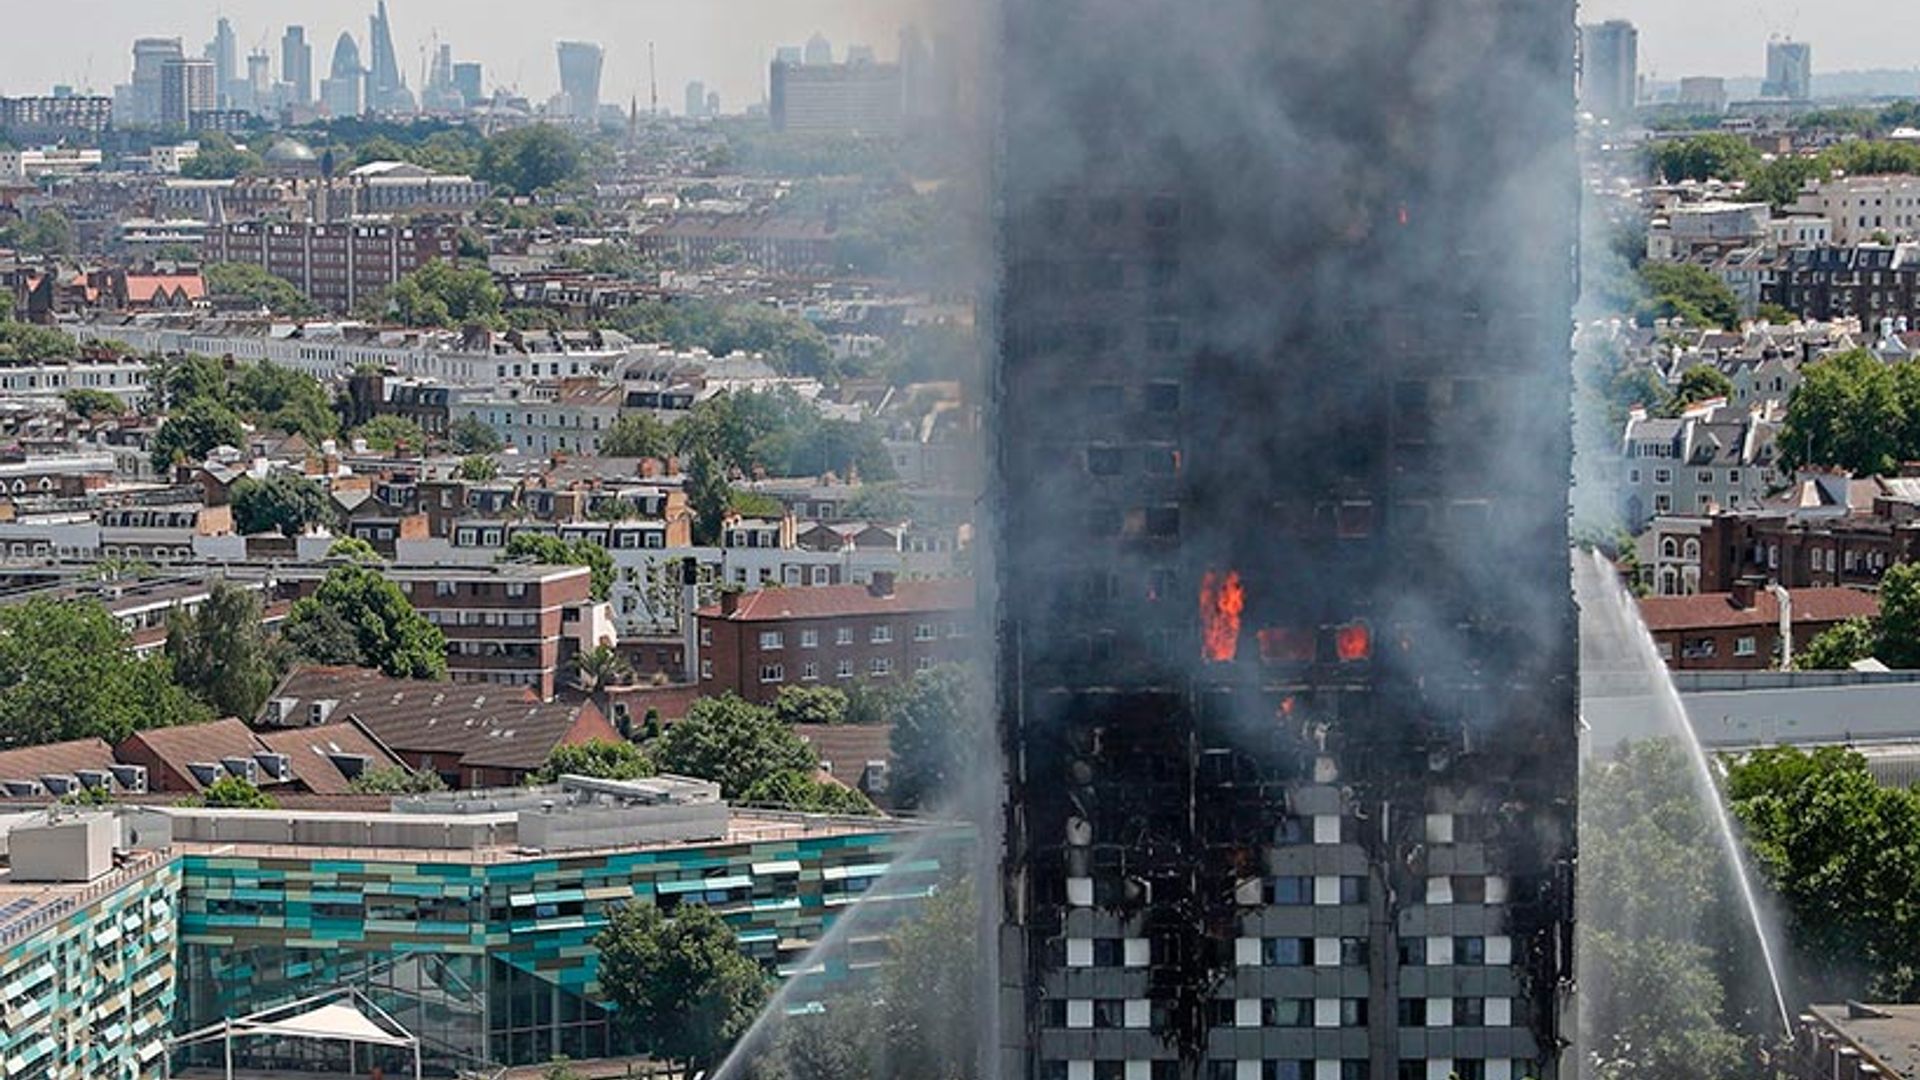 grenfell tower